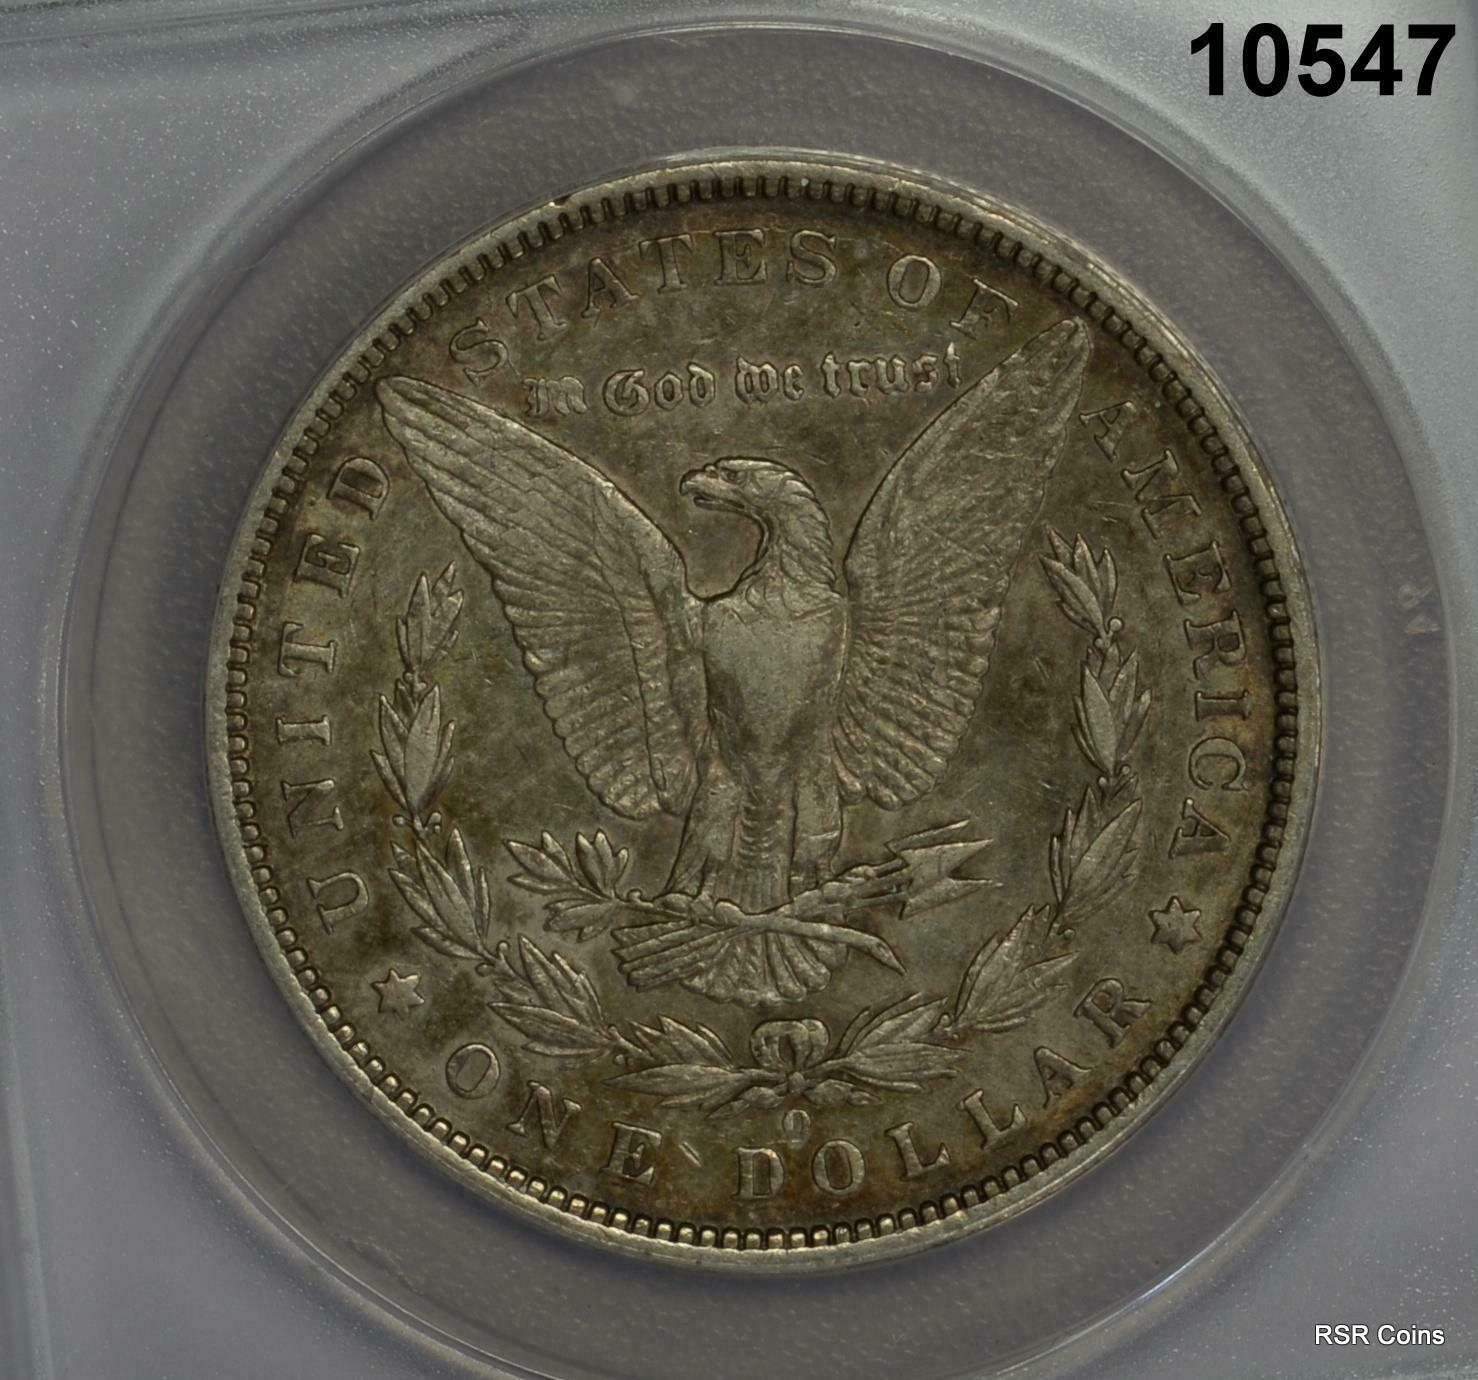 1896 O MORGAN SILVER DOLLAR ANACS CERTIFIED VF35 CLEANED #10547